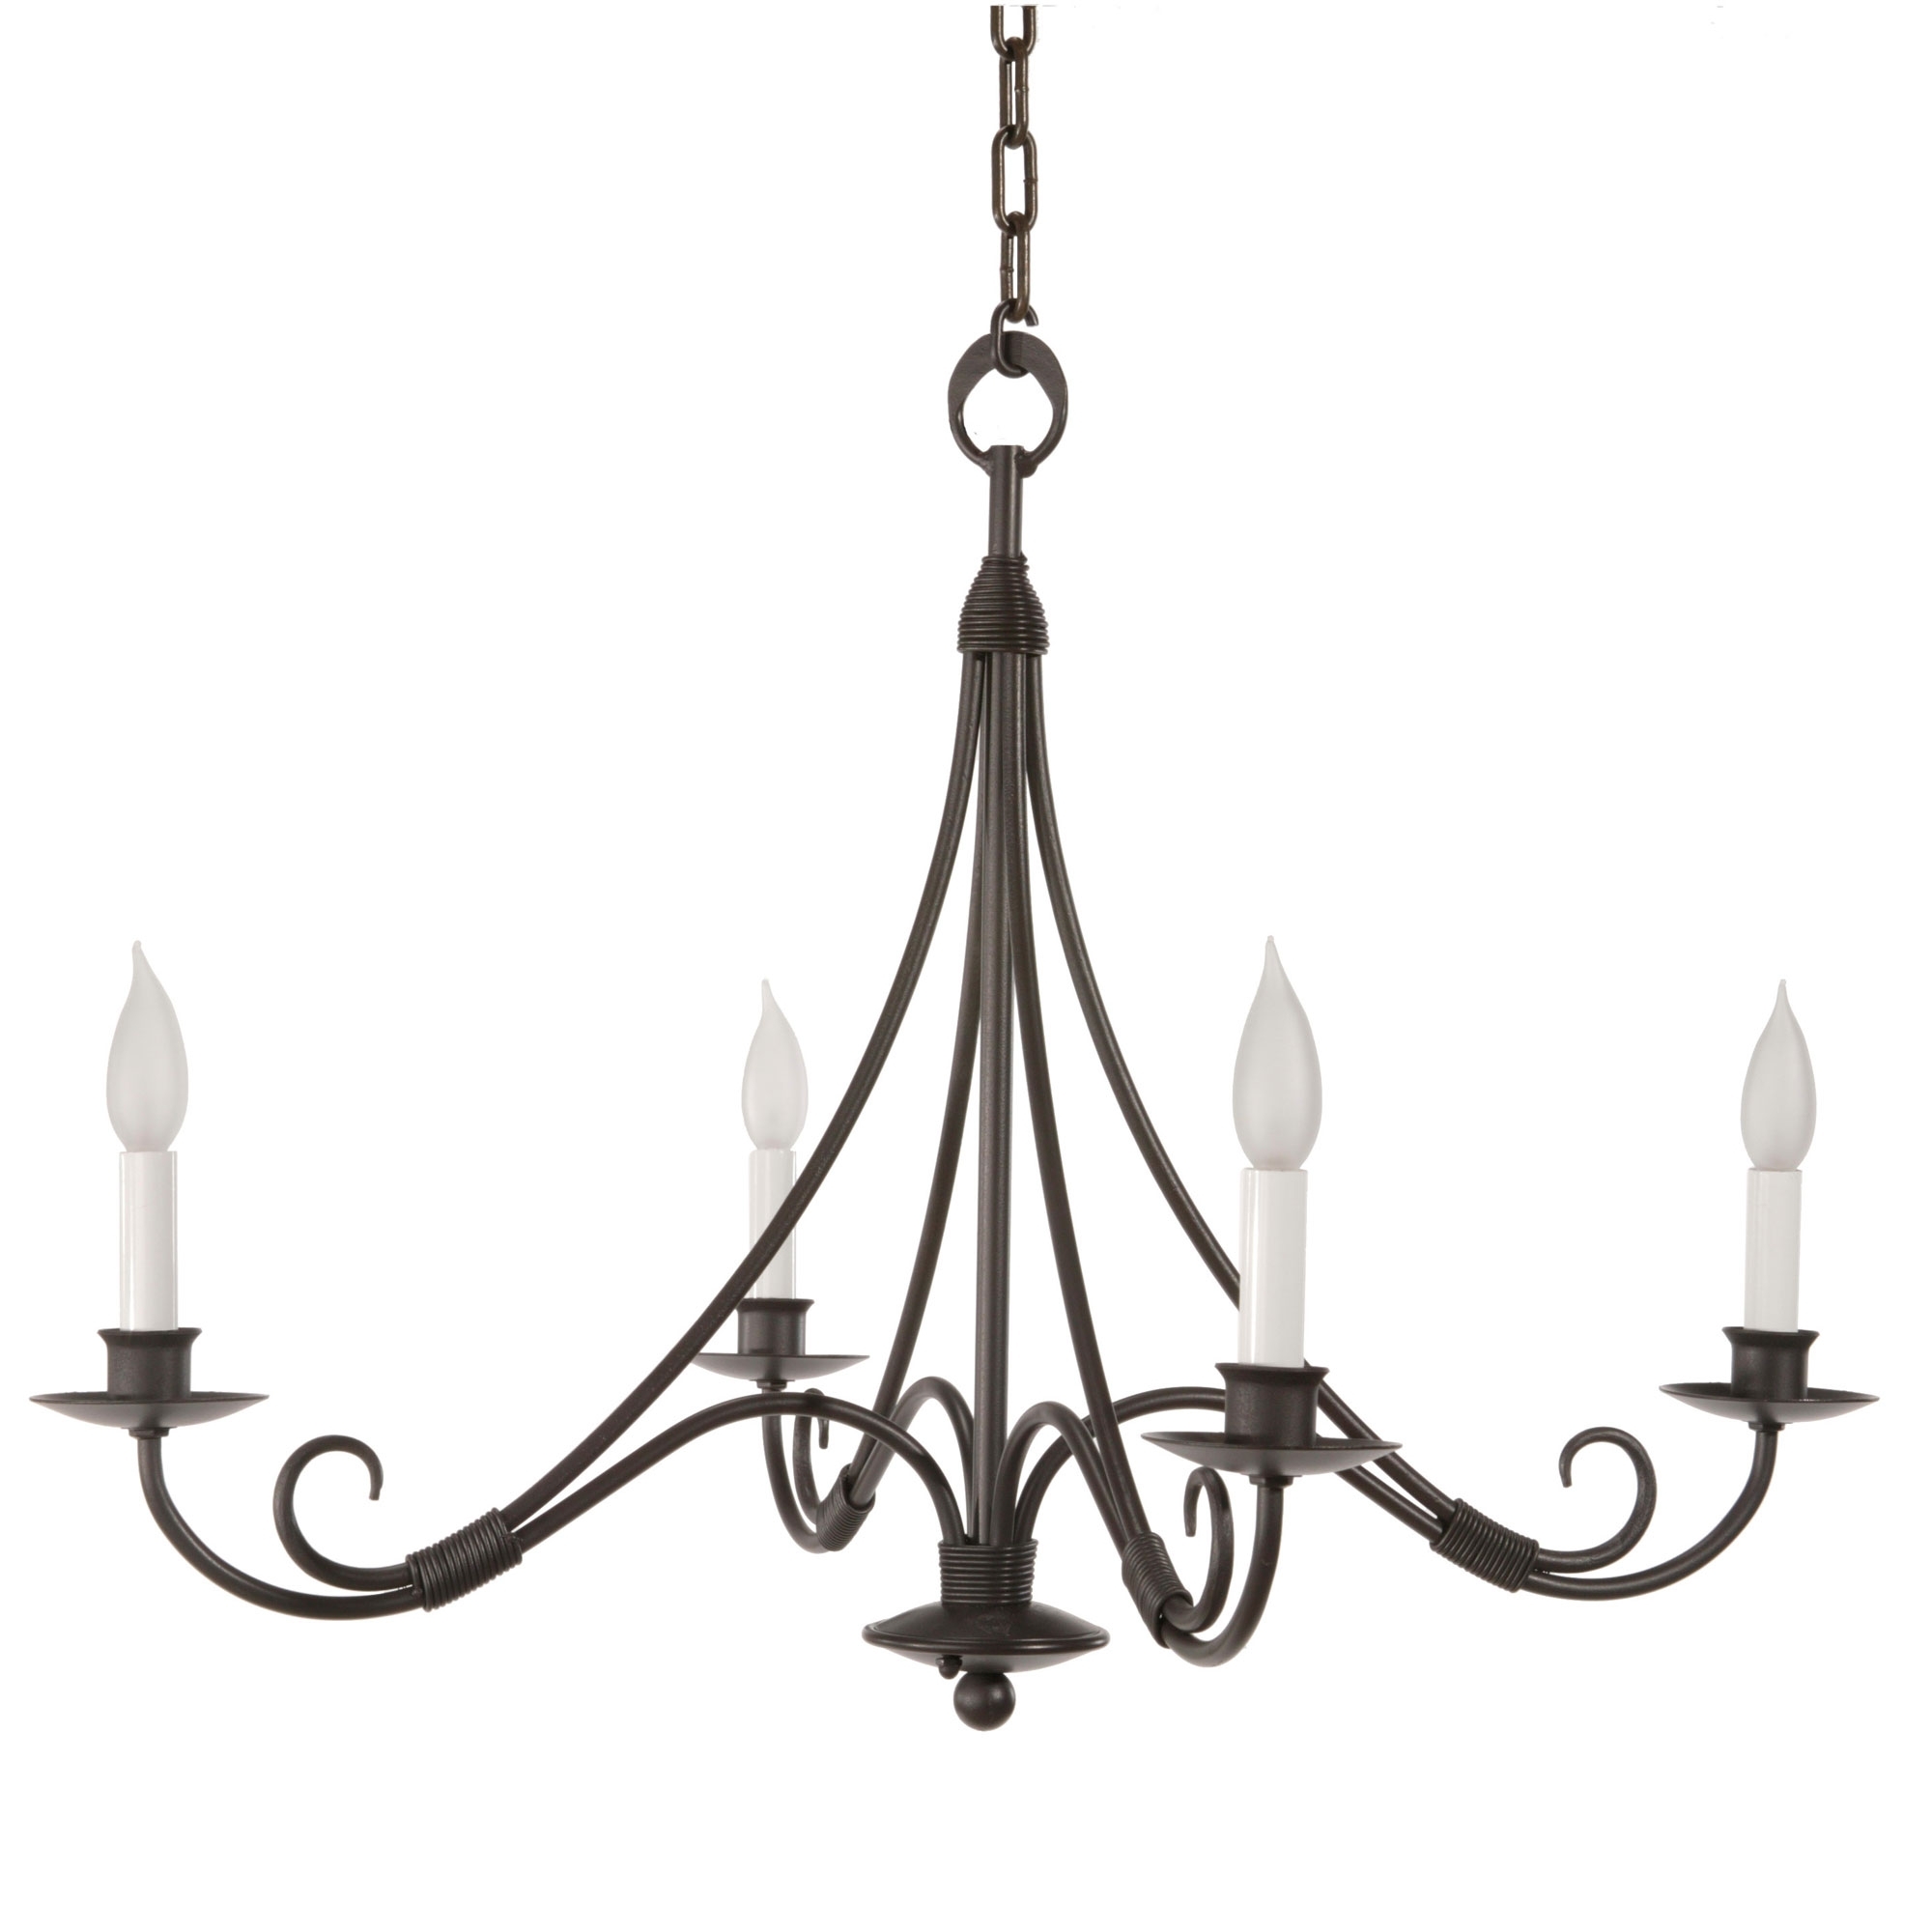 Permalink to Black Wrought Iron Ceiling Light Fixture